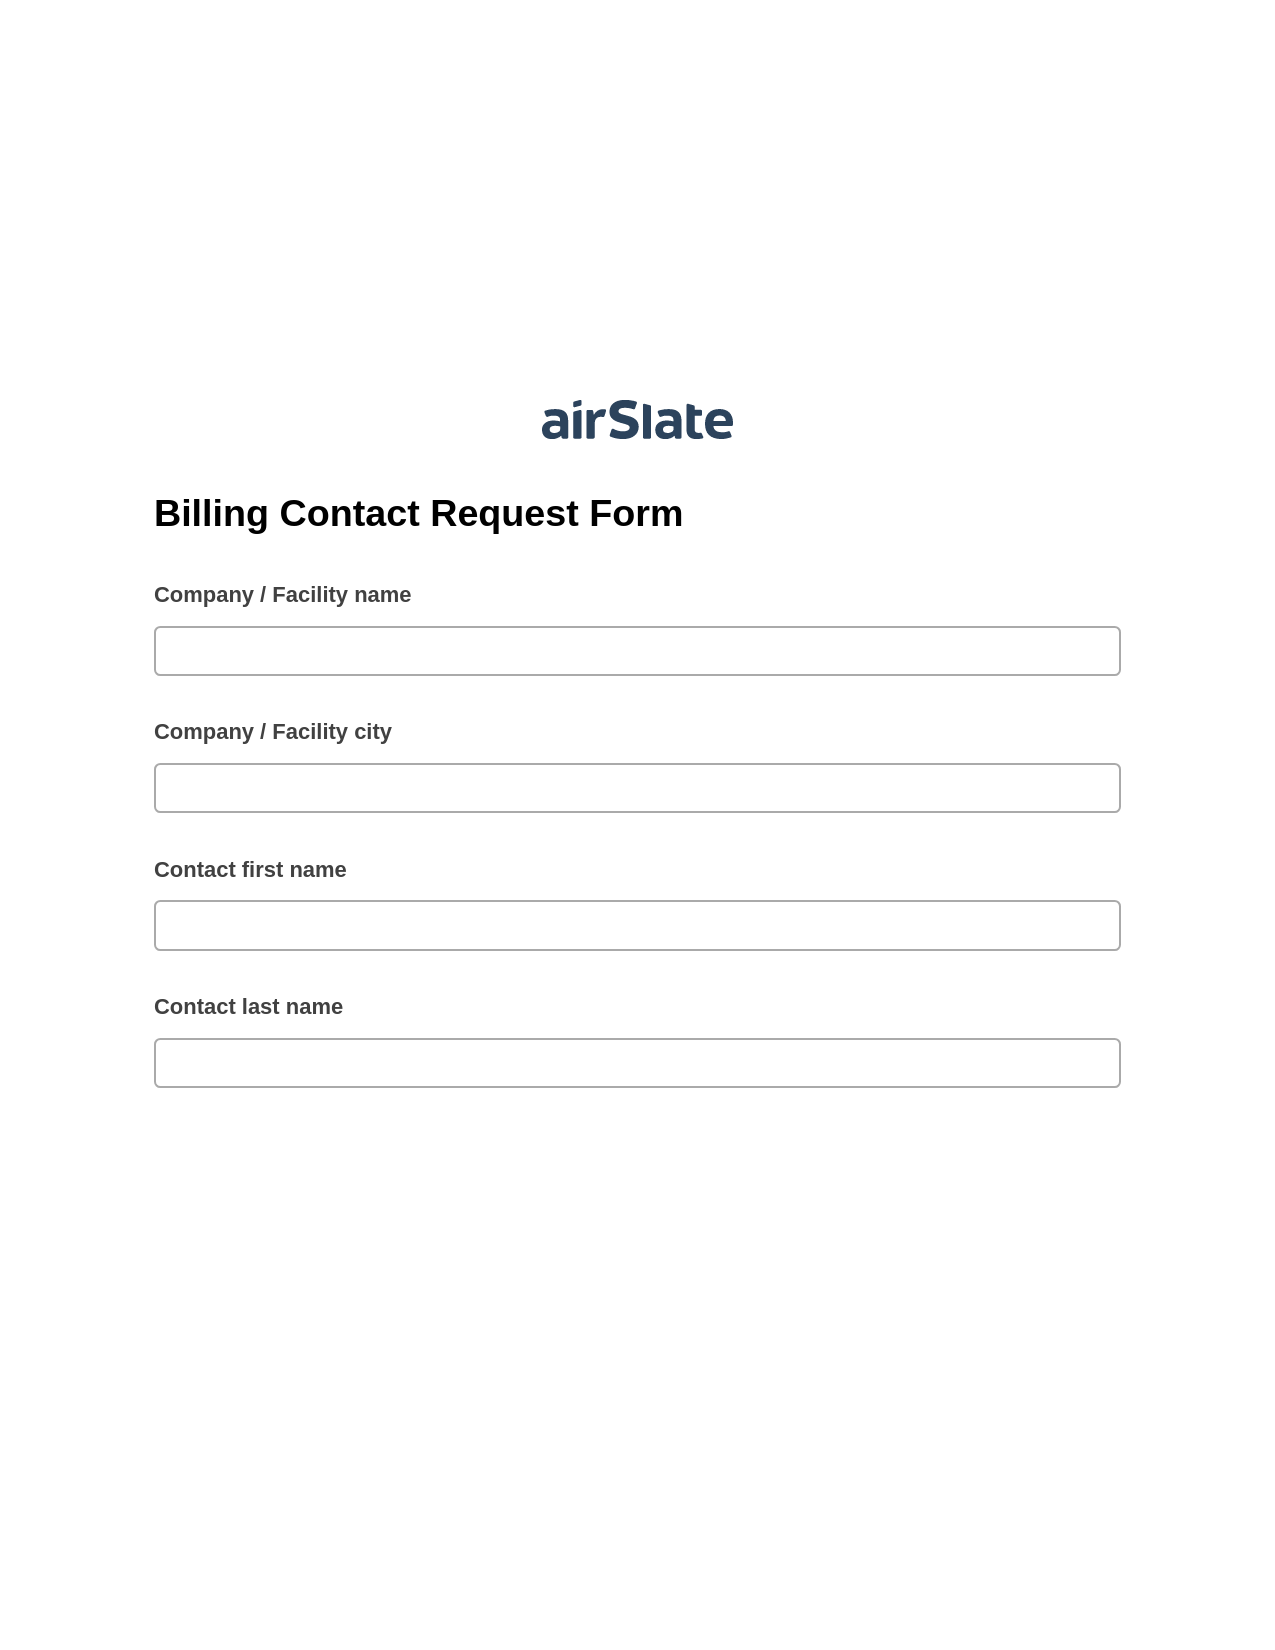 Multirole Billing Contact Request Form Pre-fill Dropdowns from CSV File Bot, Assign Roles to Recipients Bot, Text Message Notification Postfinish Bot